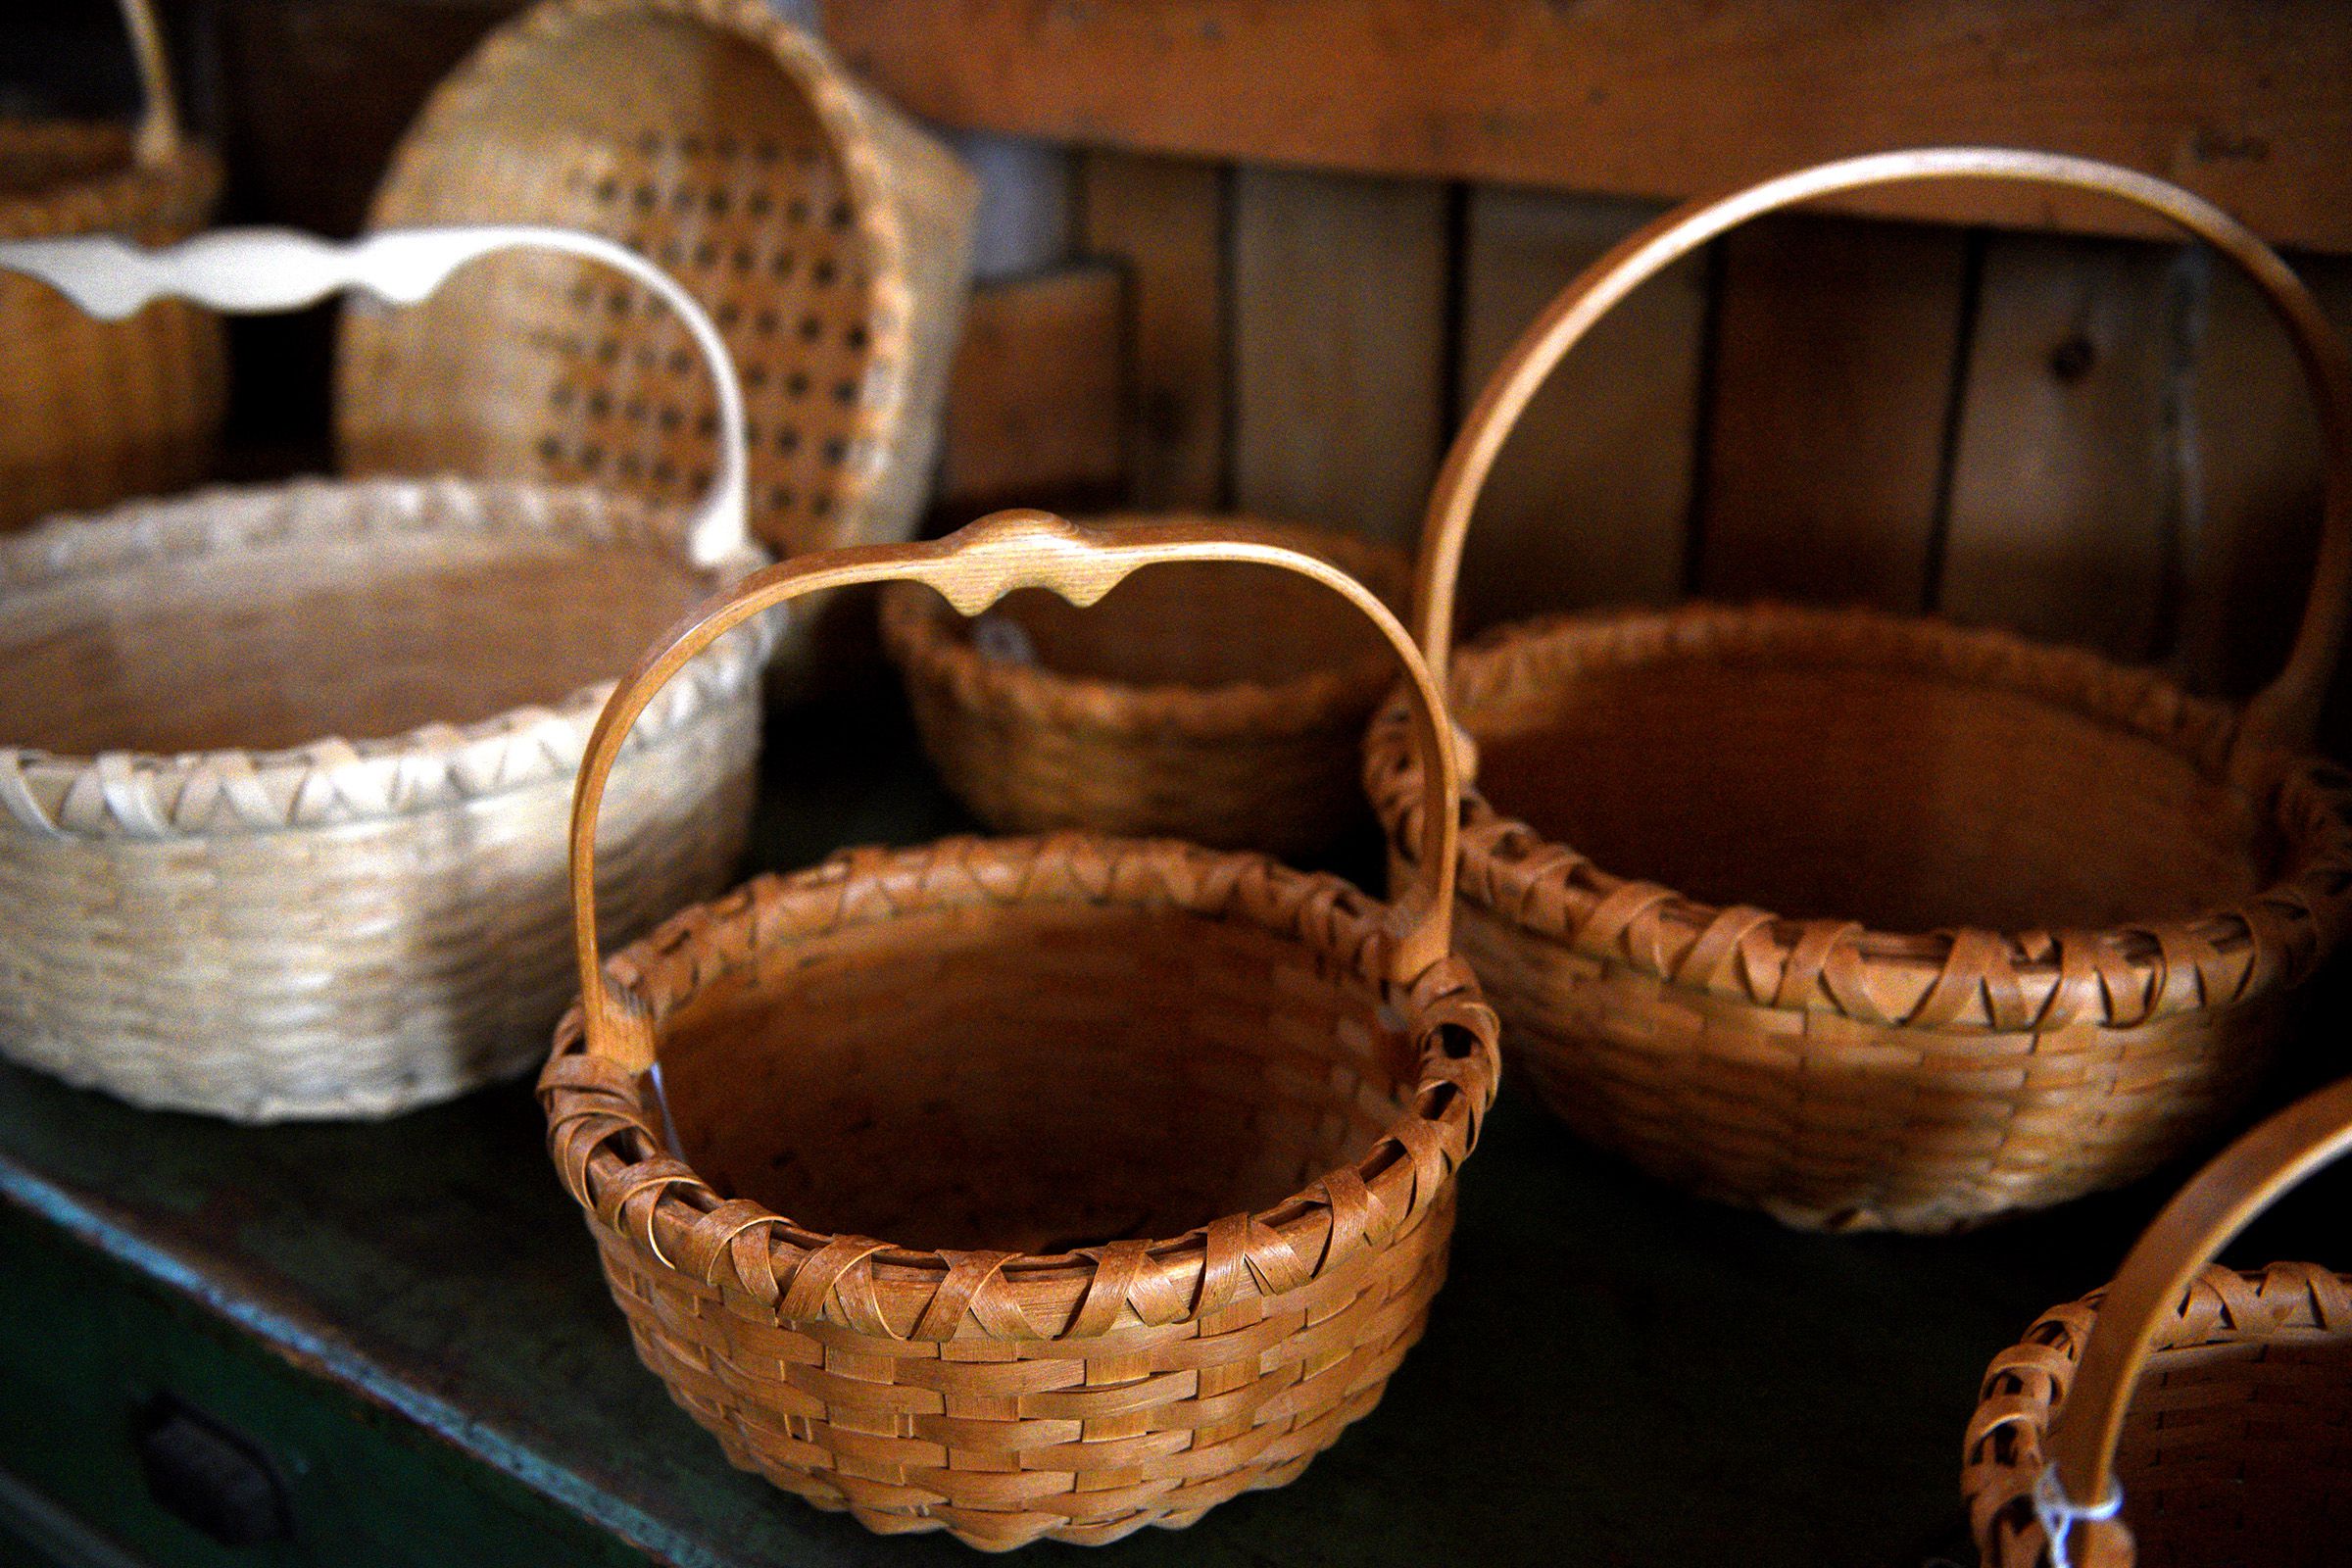 Baskets made by Jeffrey Gale fill his studio in Strafford, Vt. on Friday, Jan. 7, 2021. (Valley News - Jennifer Hauck) Copyright Valley News. May not be reprinted or used online without permission. Send requests to permission@vnews.com.